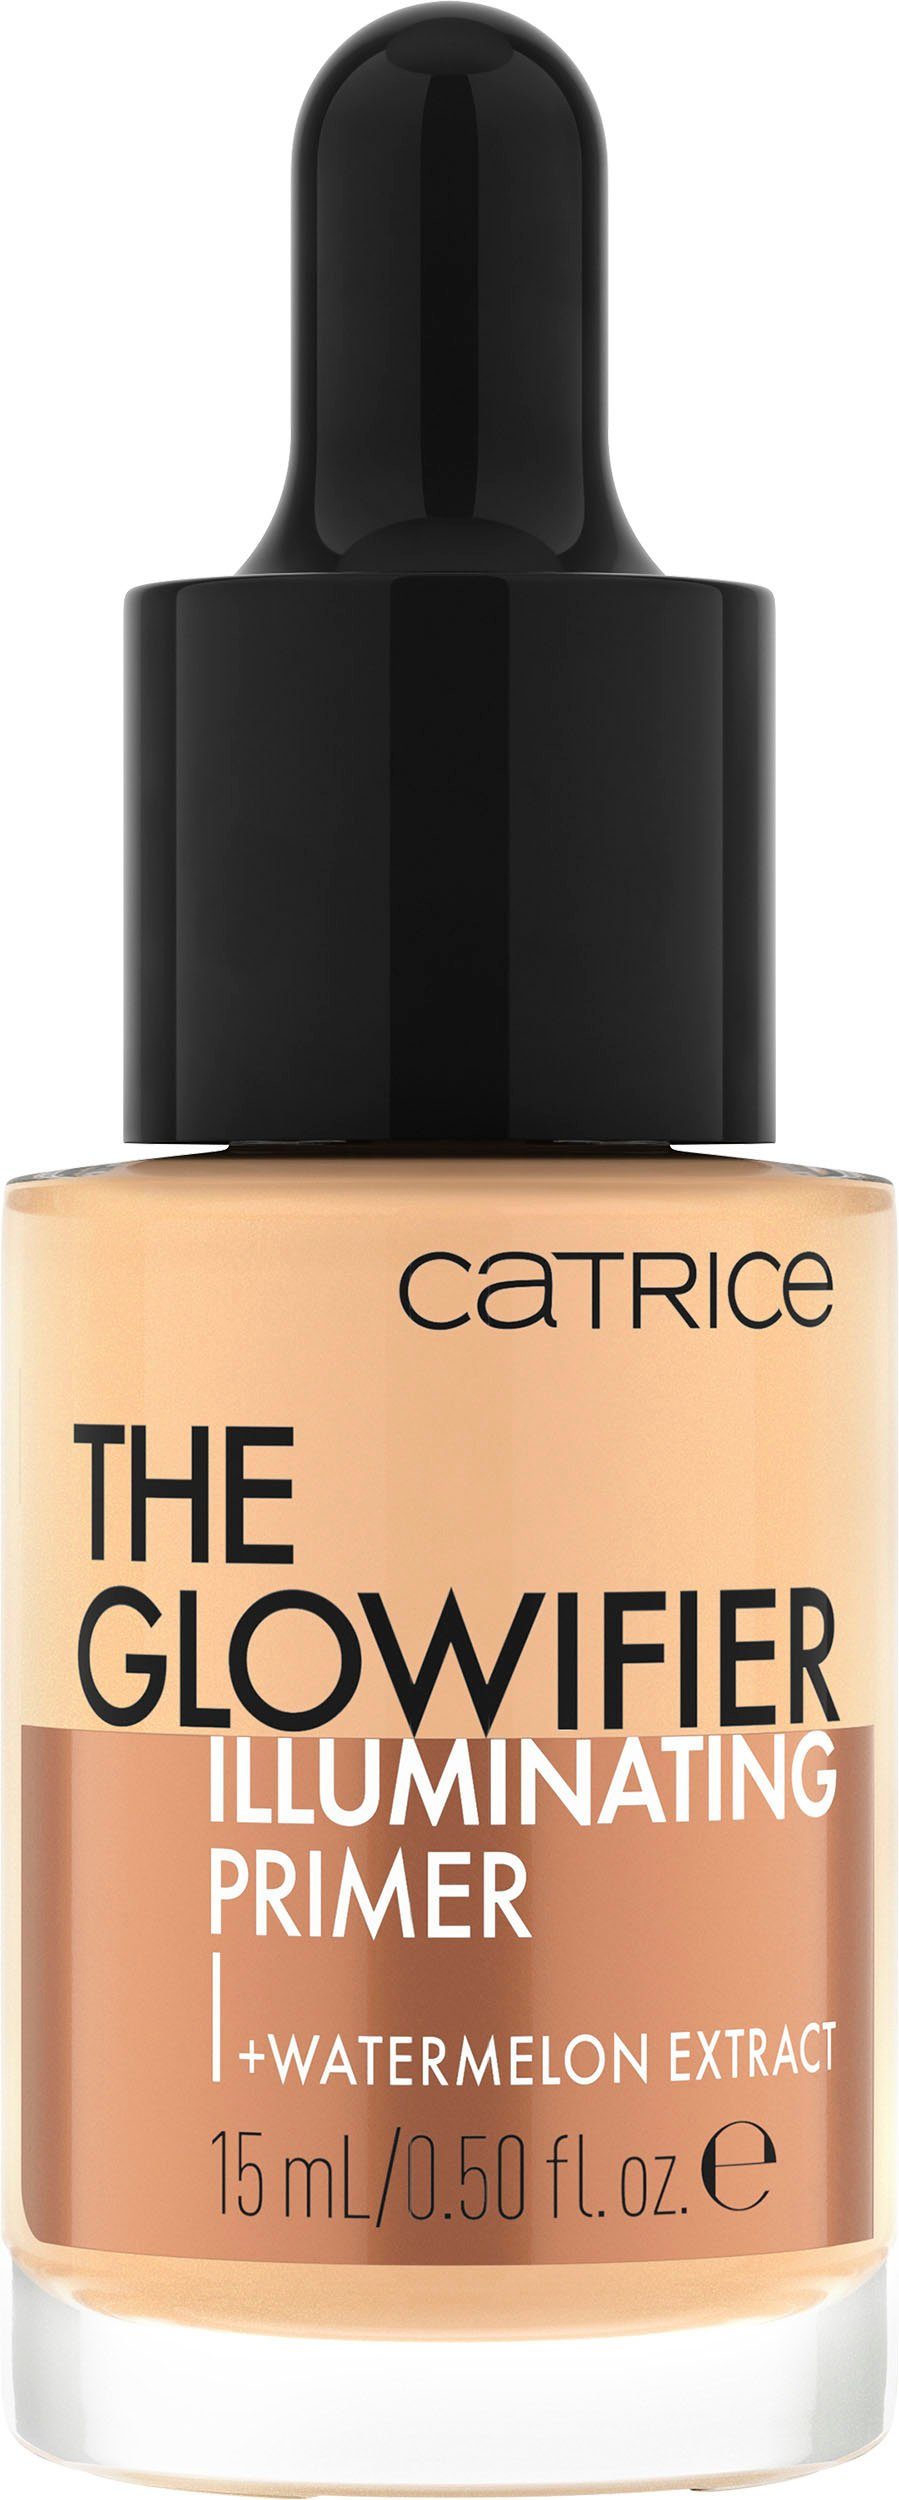 The Glowifier Illuminating Catrice Catrice 010, Primer Primer